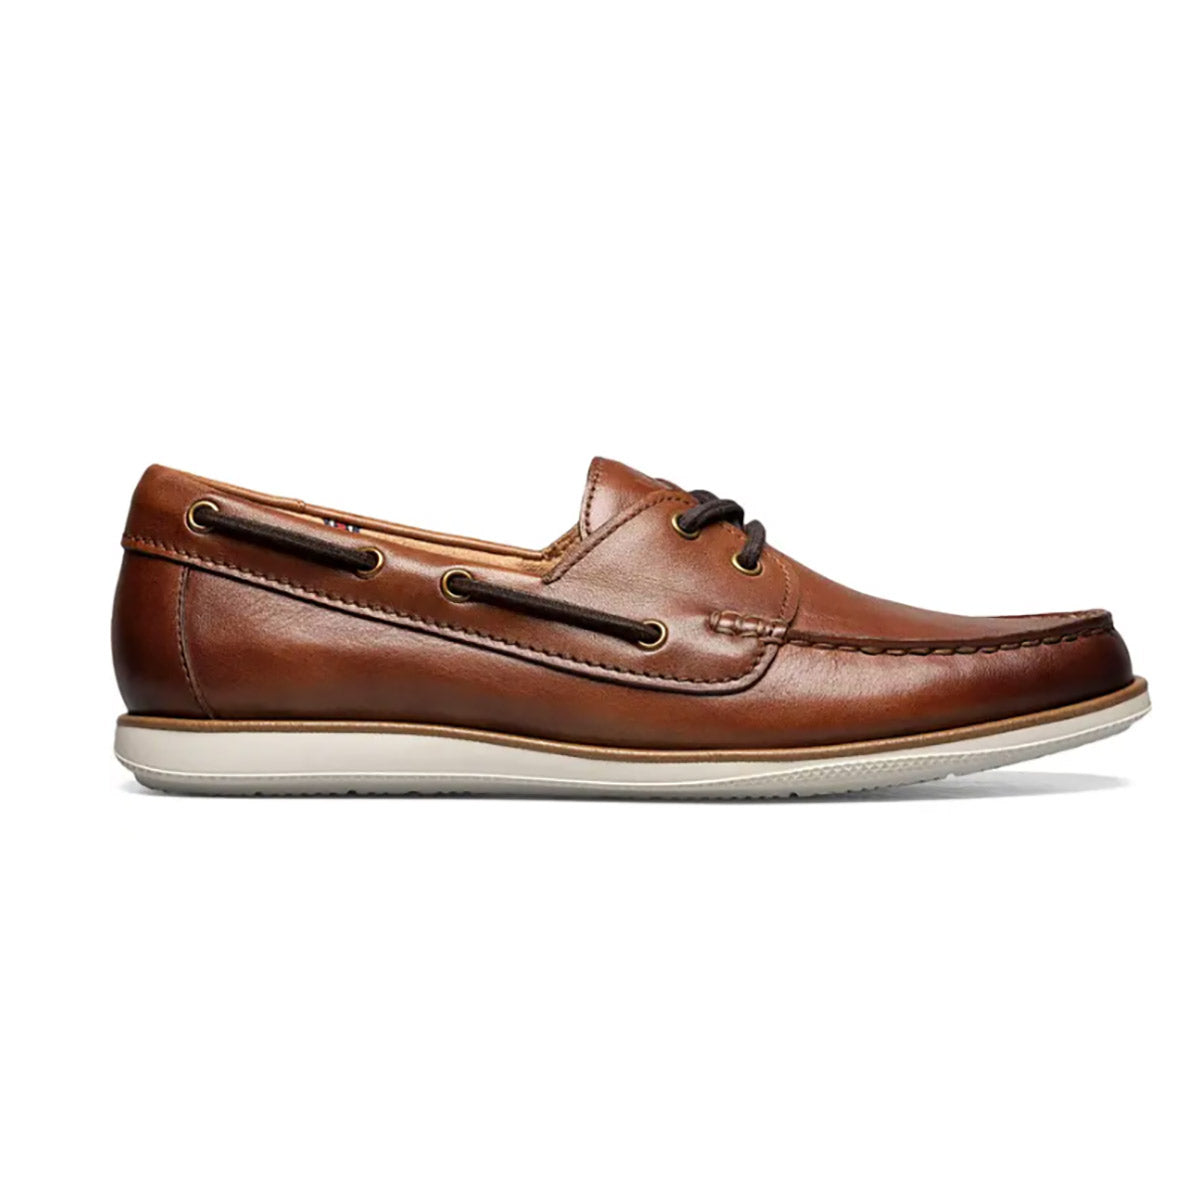 A single Florsheim FLORSHEIM ATLANTIC BOAT CHOCO - MENS shoe with EVA sole, isolated on a white background.